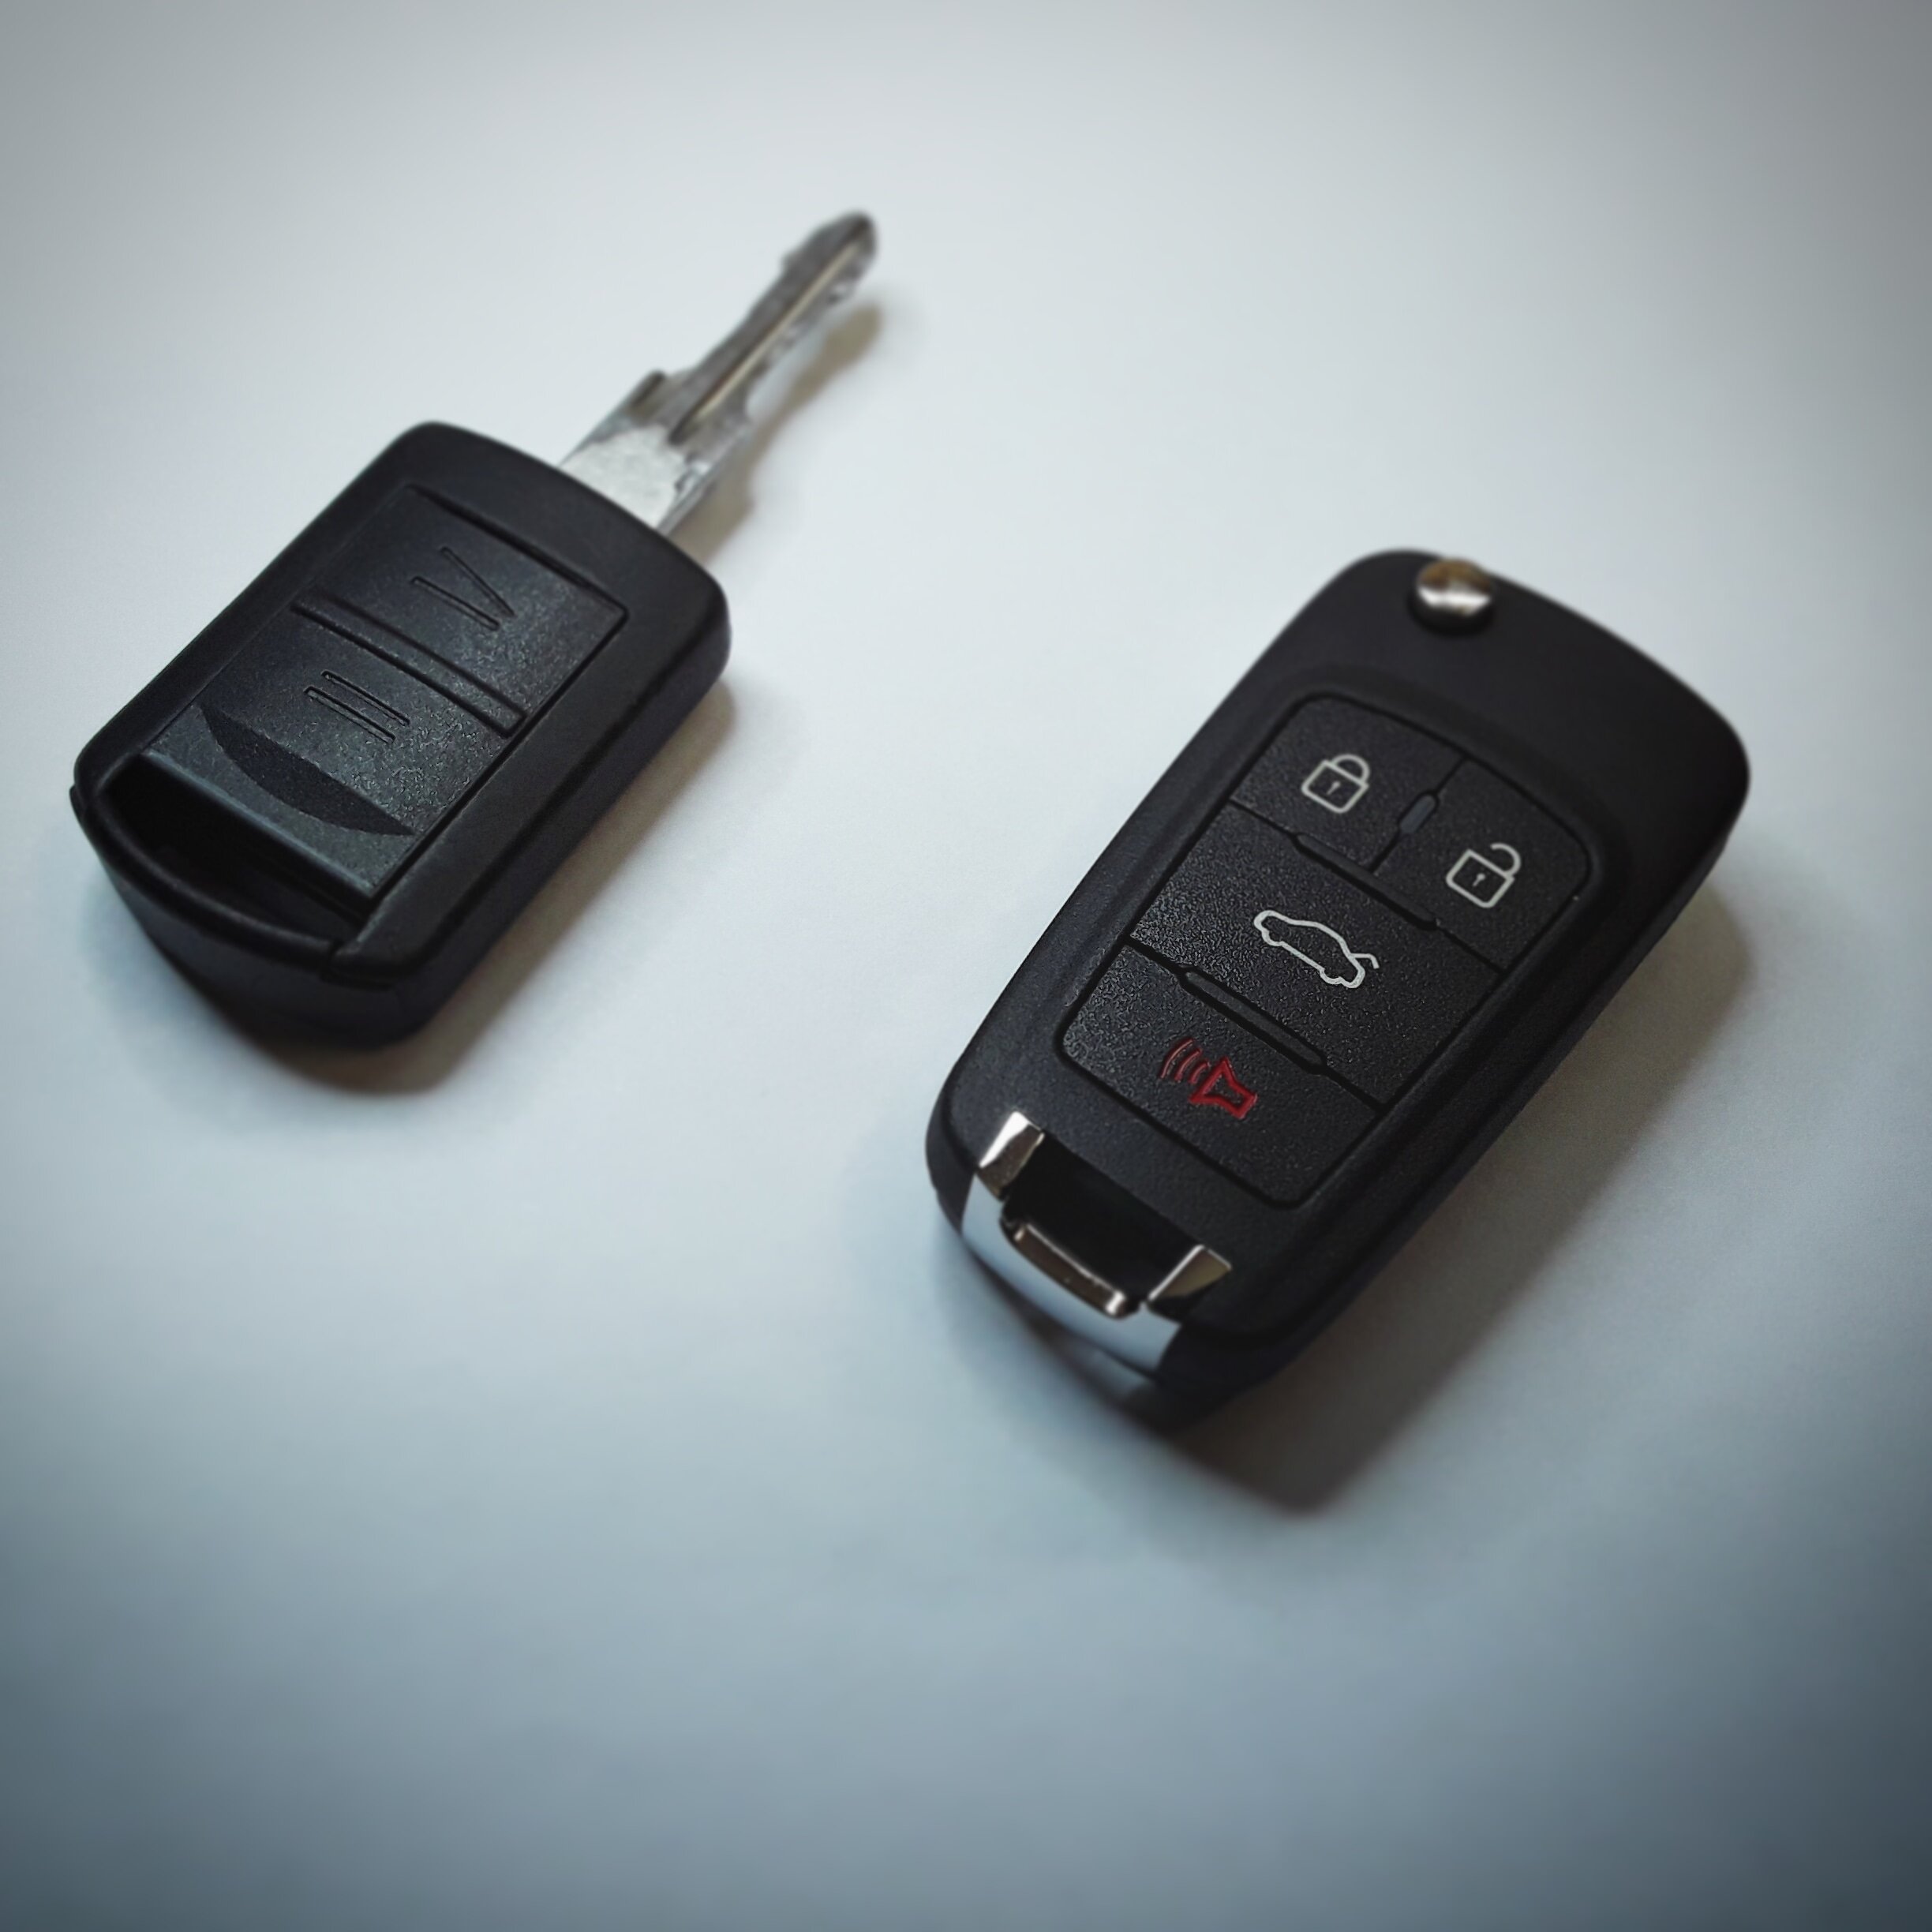 2012 + Opel Combo Remote Key for Vauxhall FREE KEY CUTTING